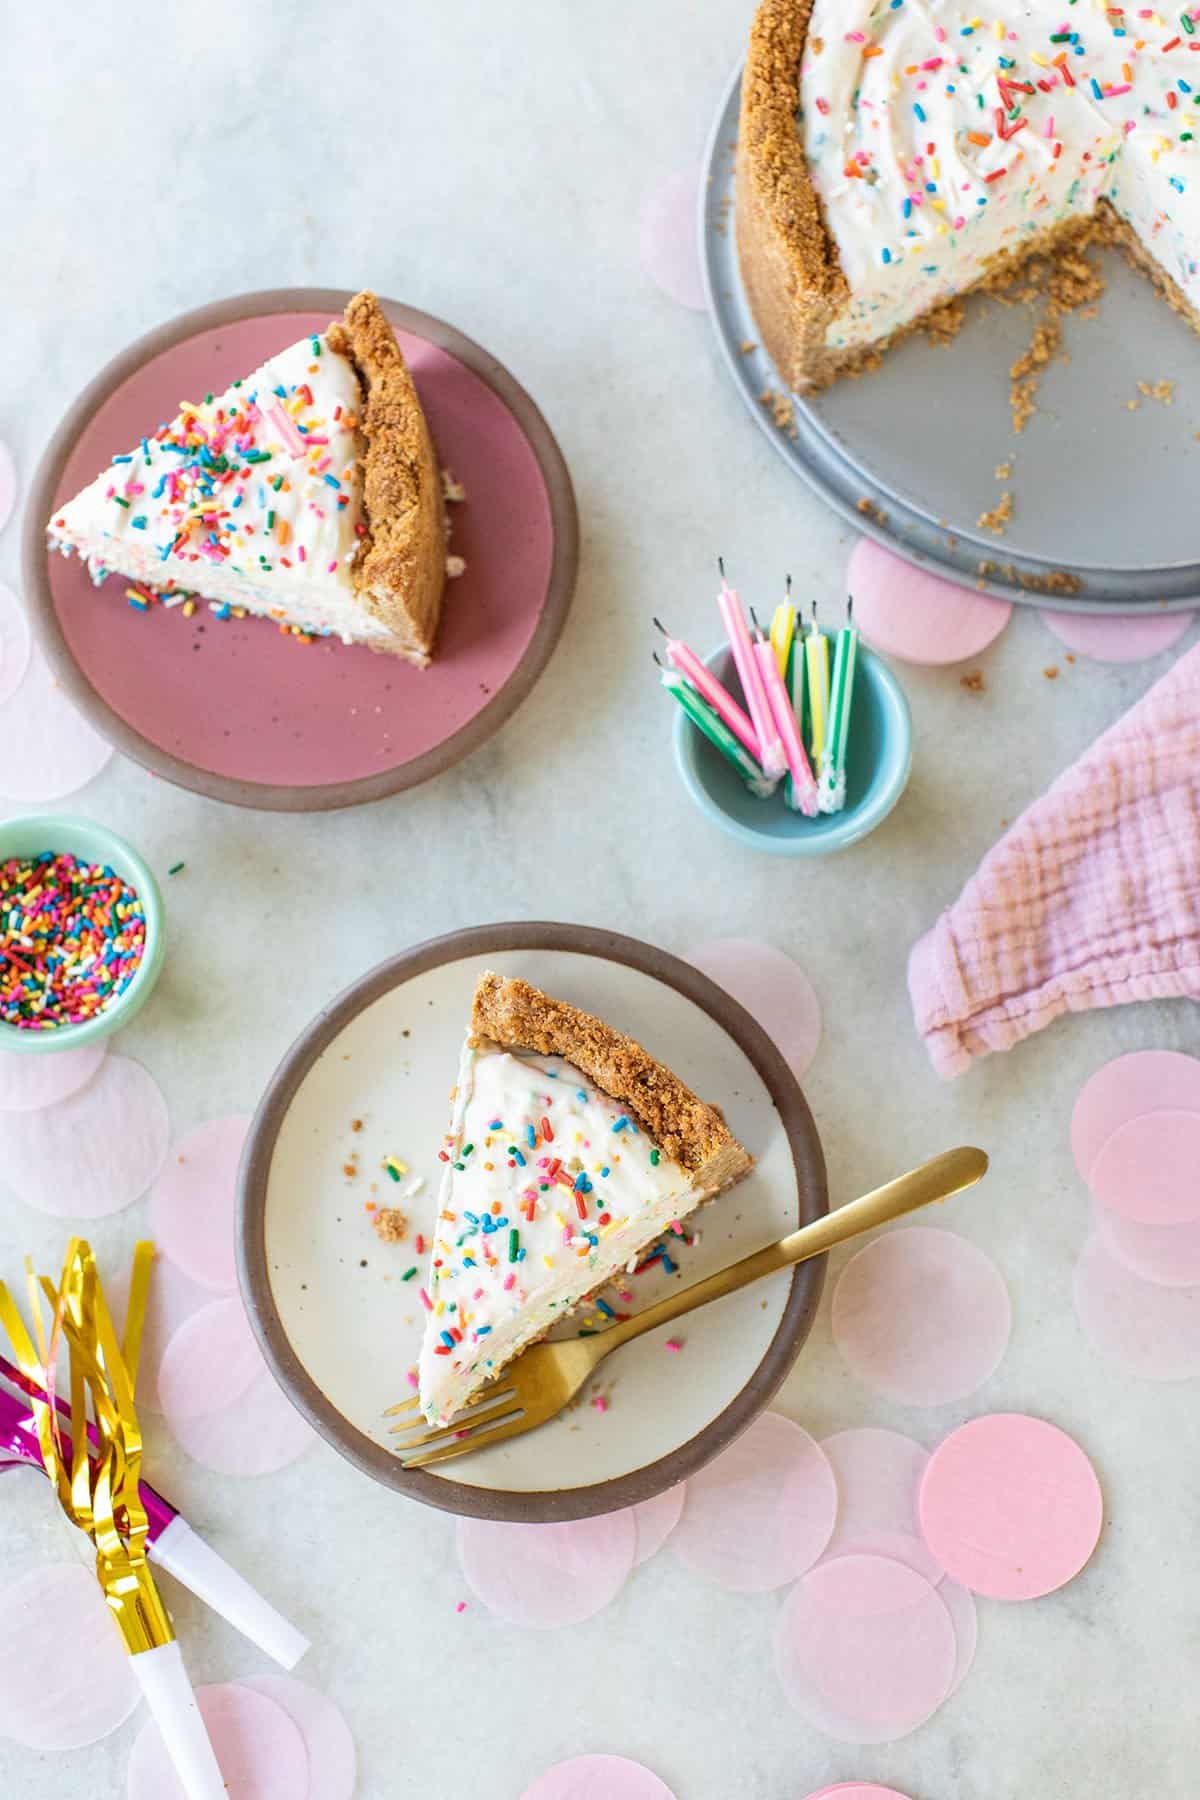 Cheesecake recipe with sprinkles for a birthday party.